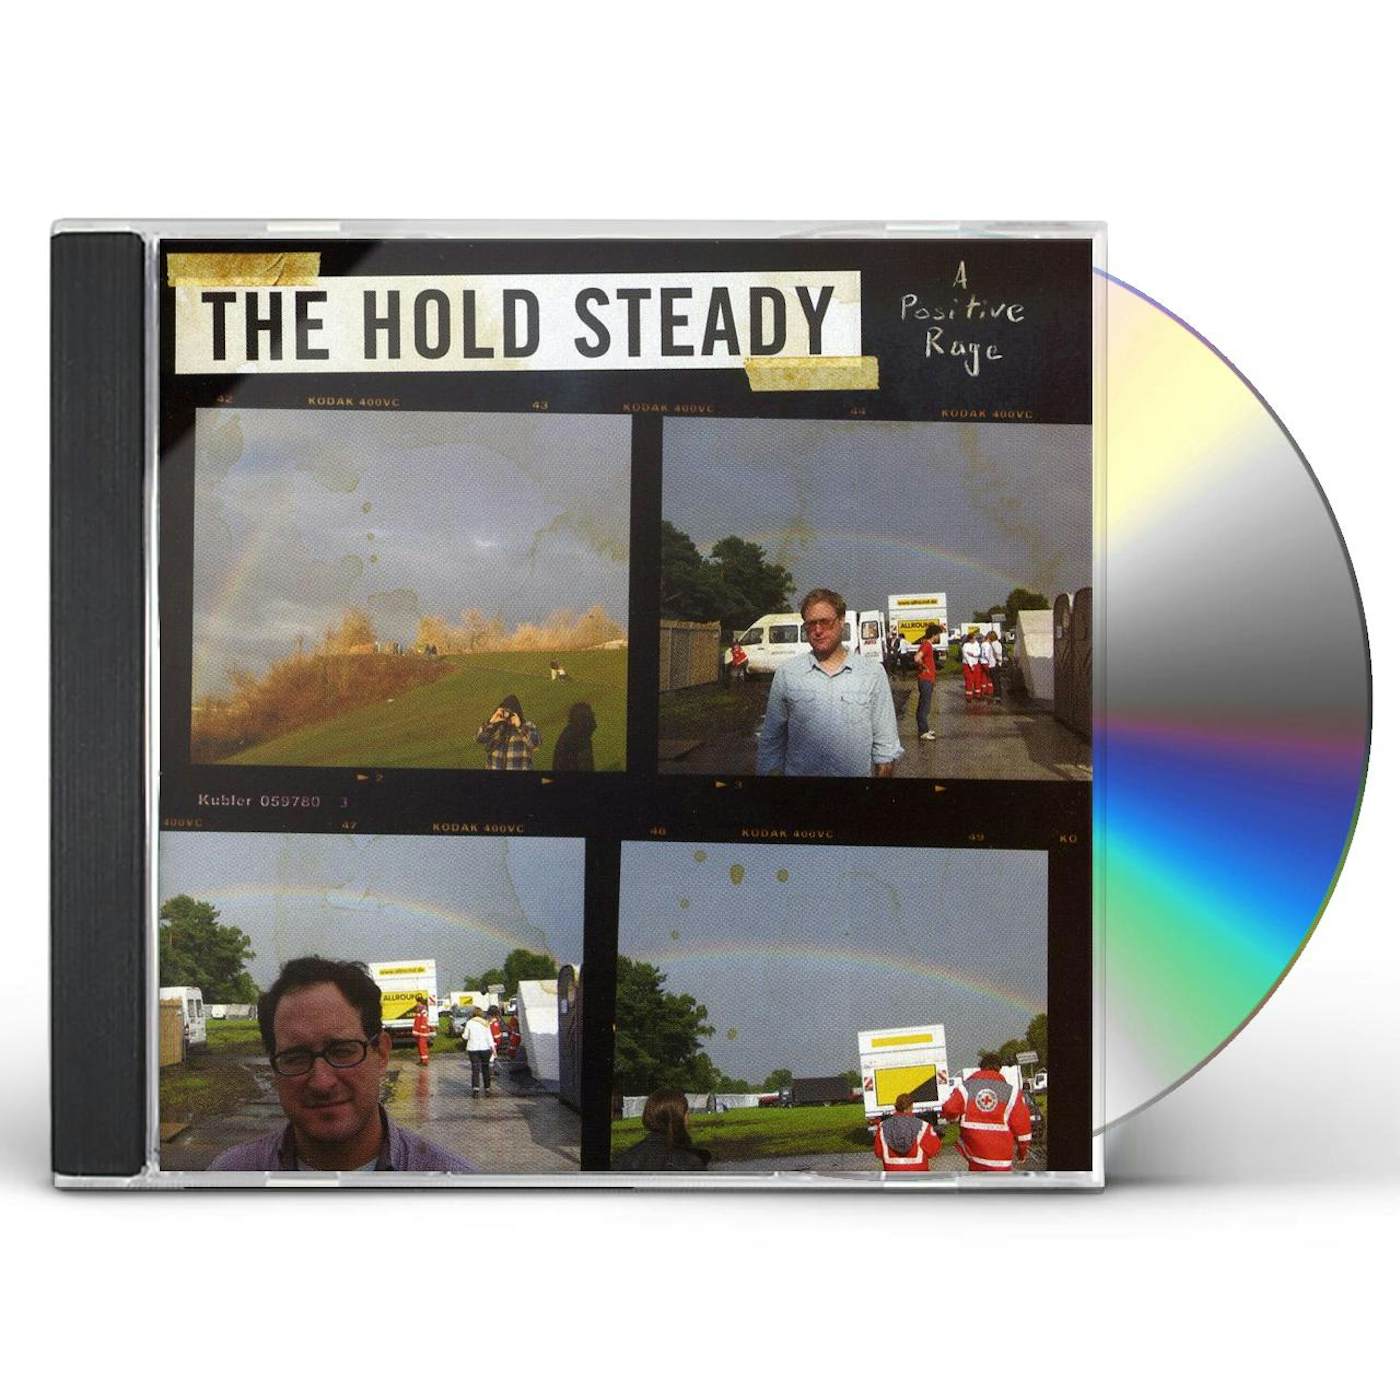 The Hold Steady POSITIVE RAGE CD